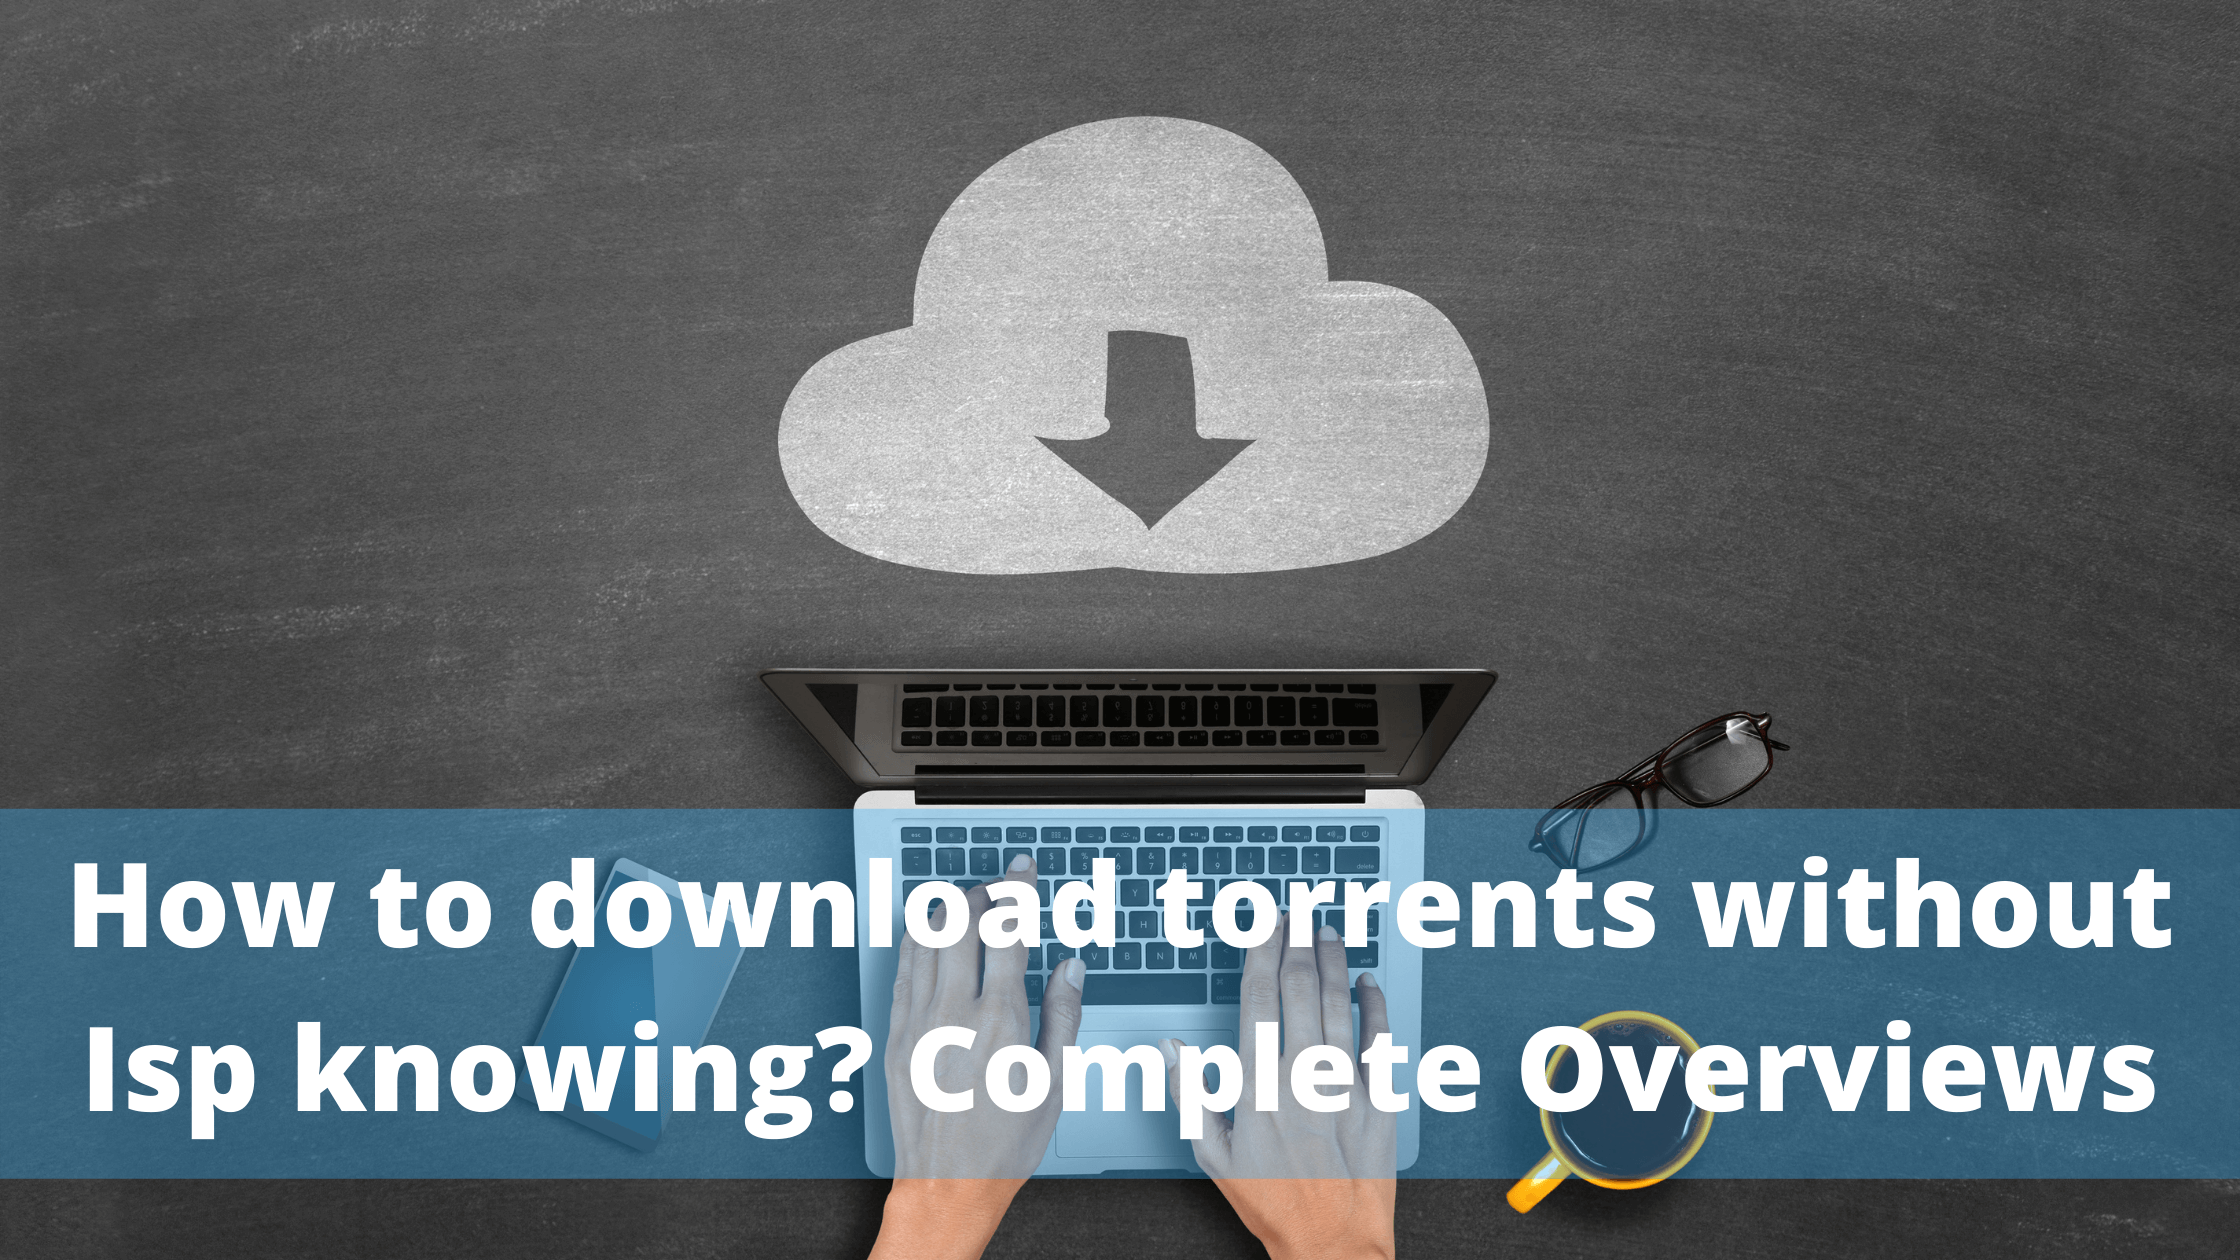 How to download torrents without Isp knowing Complete Overviews